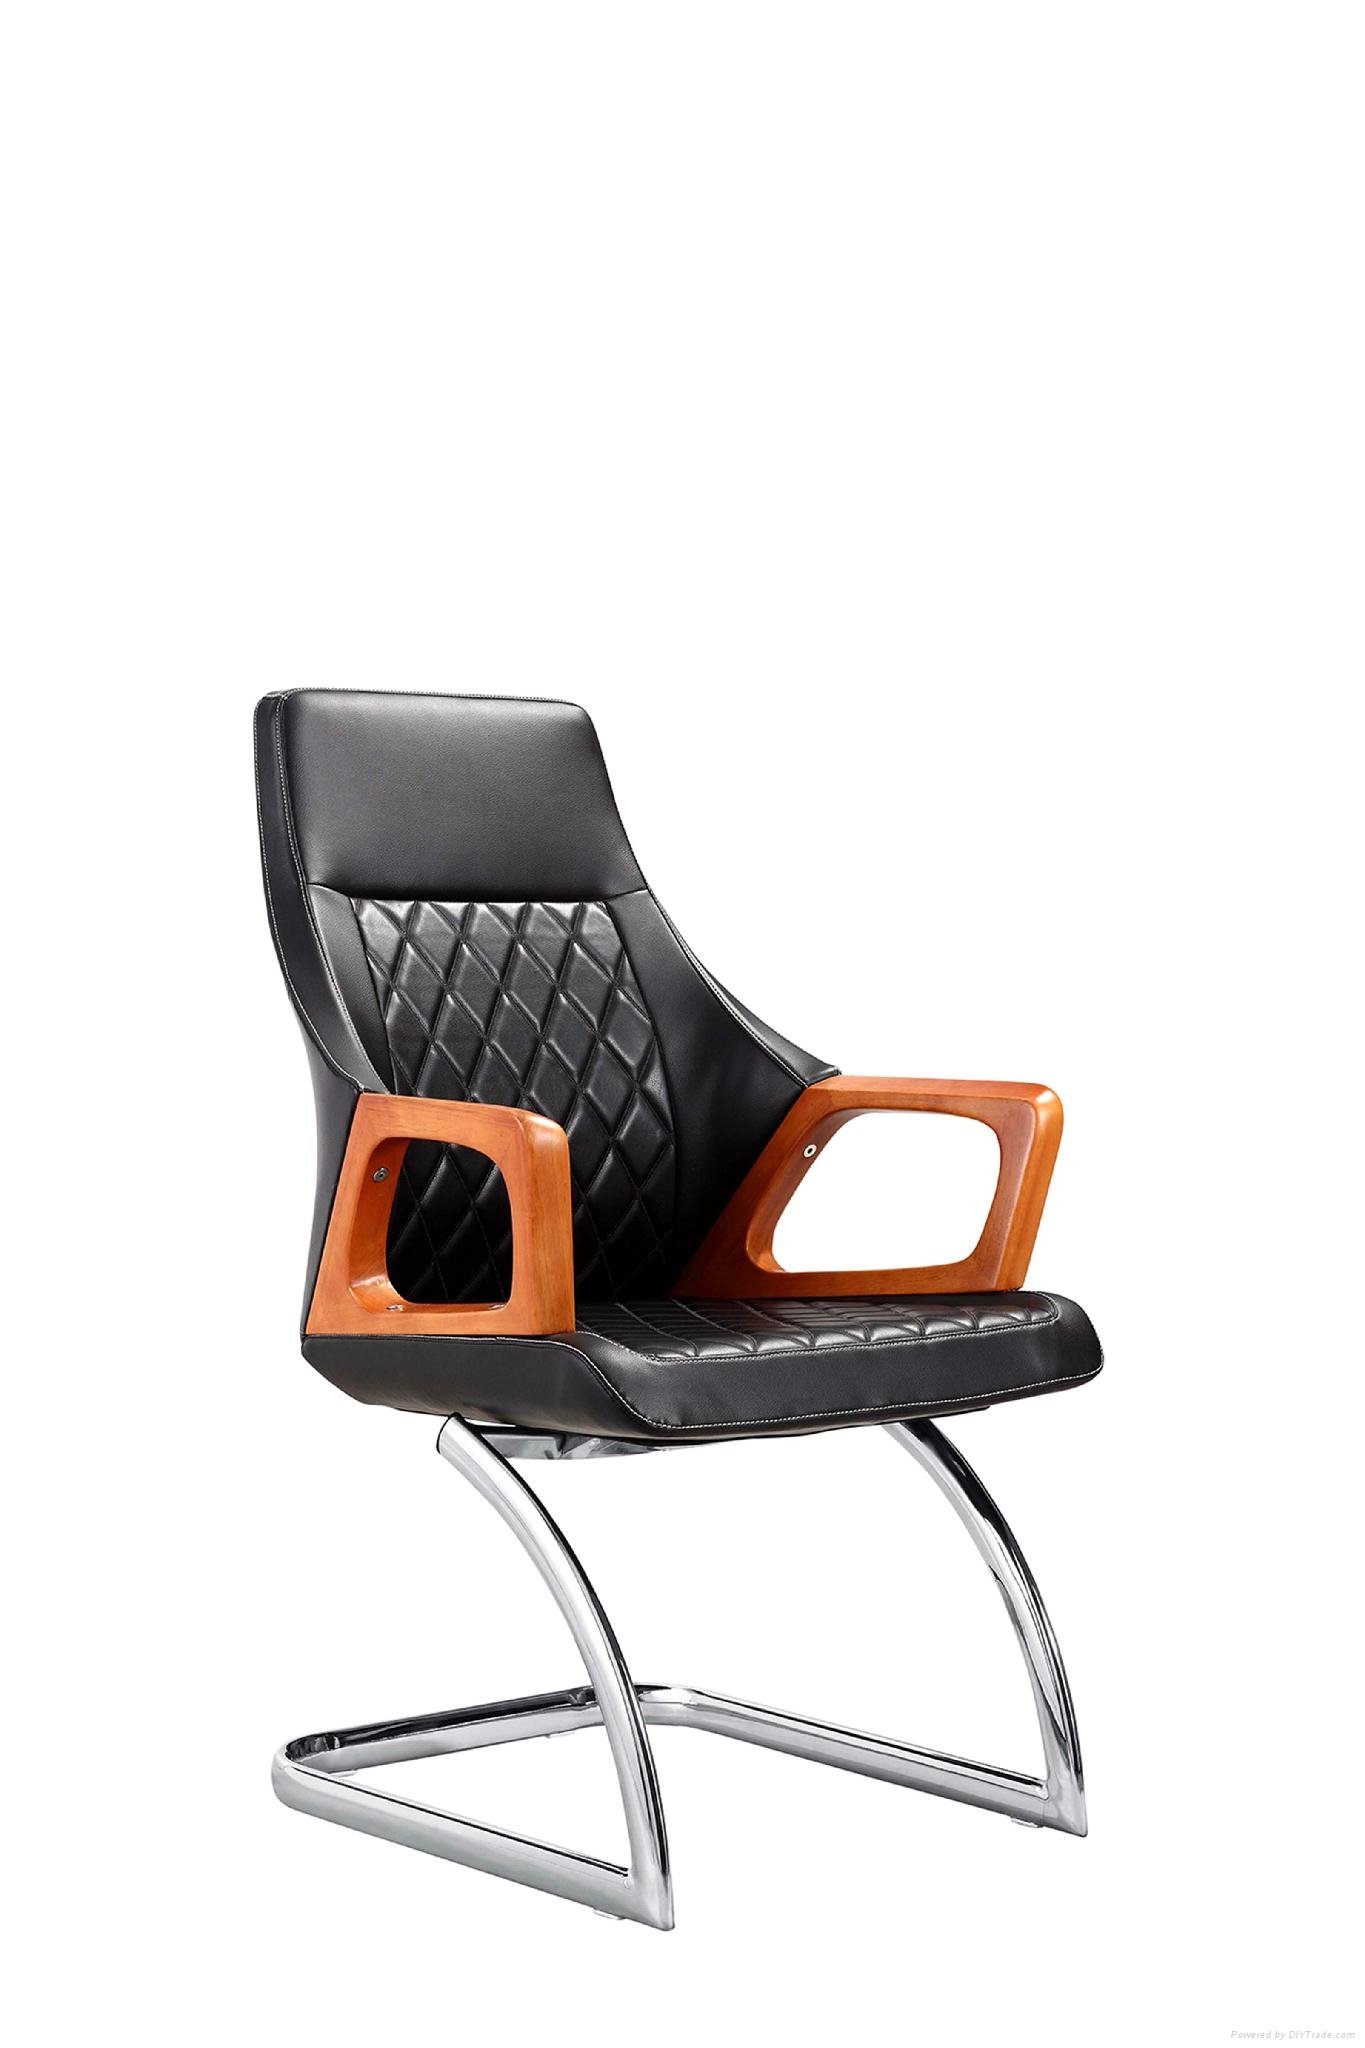 luxury office chair 2